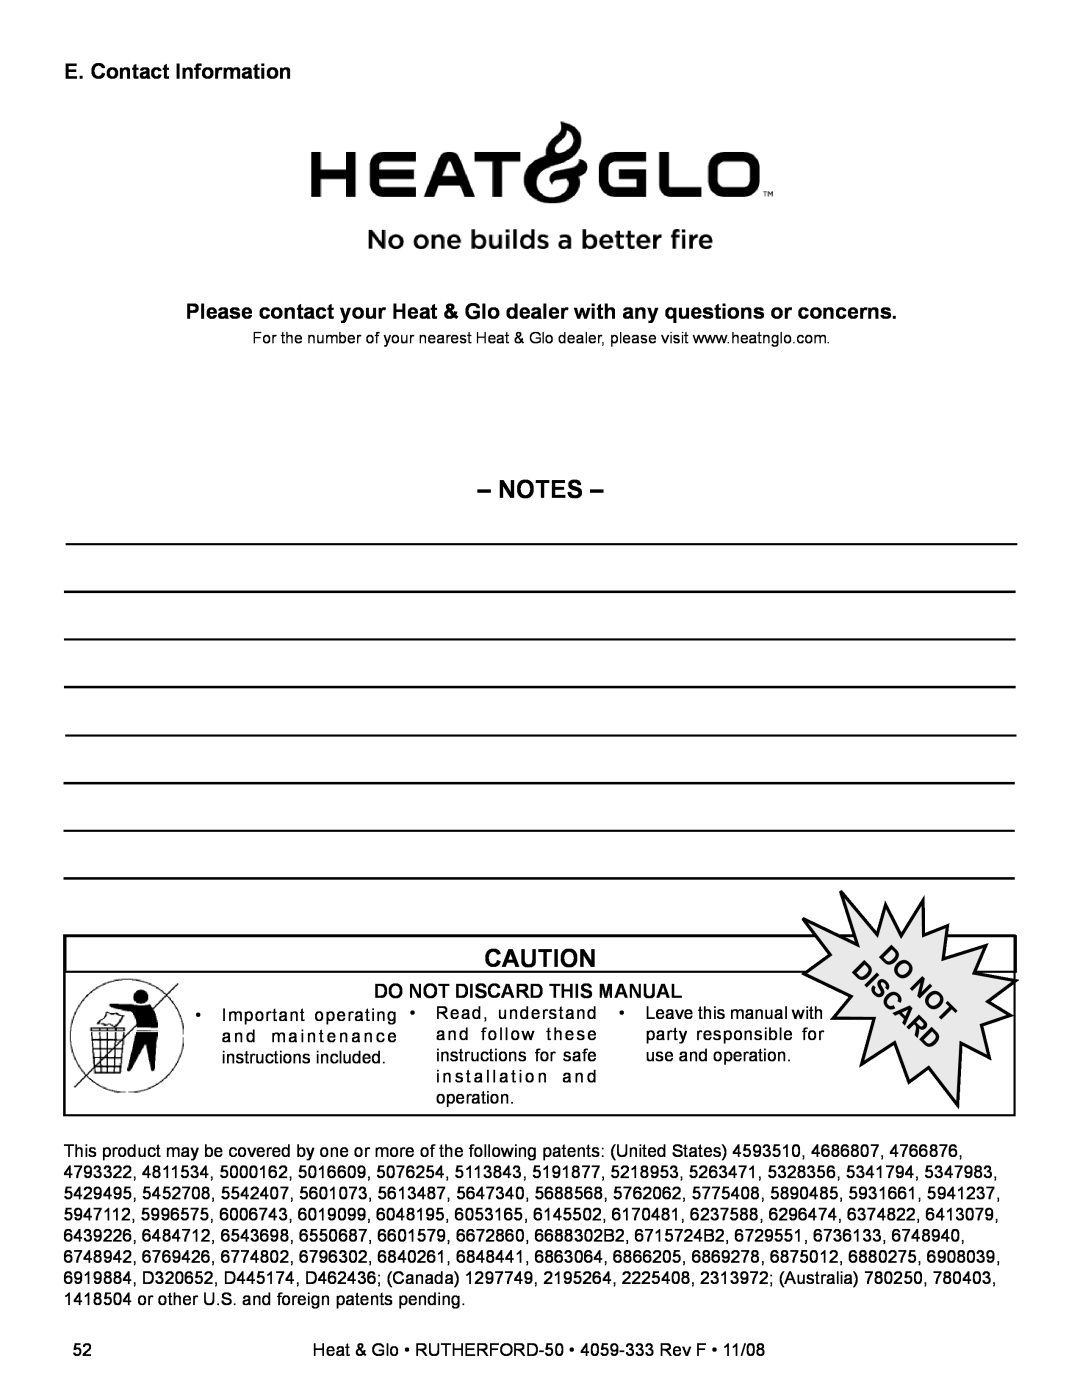 Hearth and Home Technologies RUTHERFORD-50 owner manual E. Contact Information, Do Not Discard This Manual, Do Discardnot 